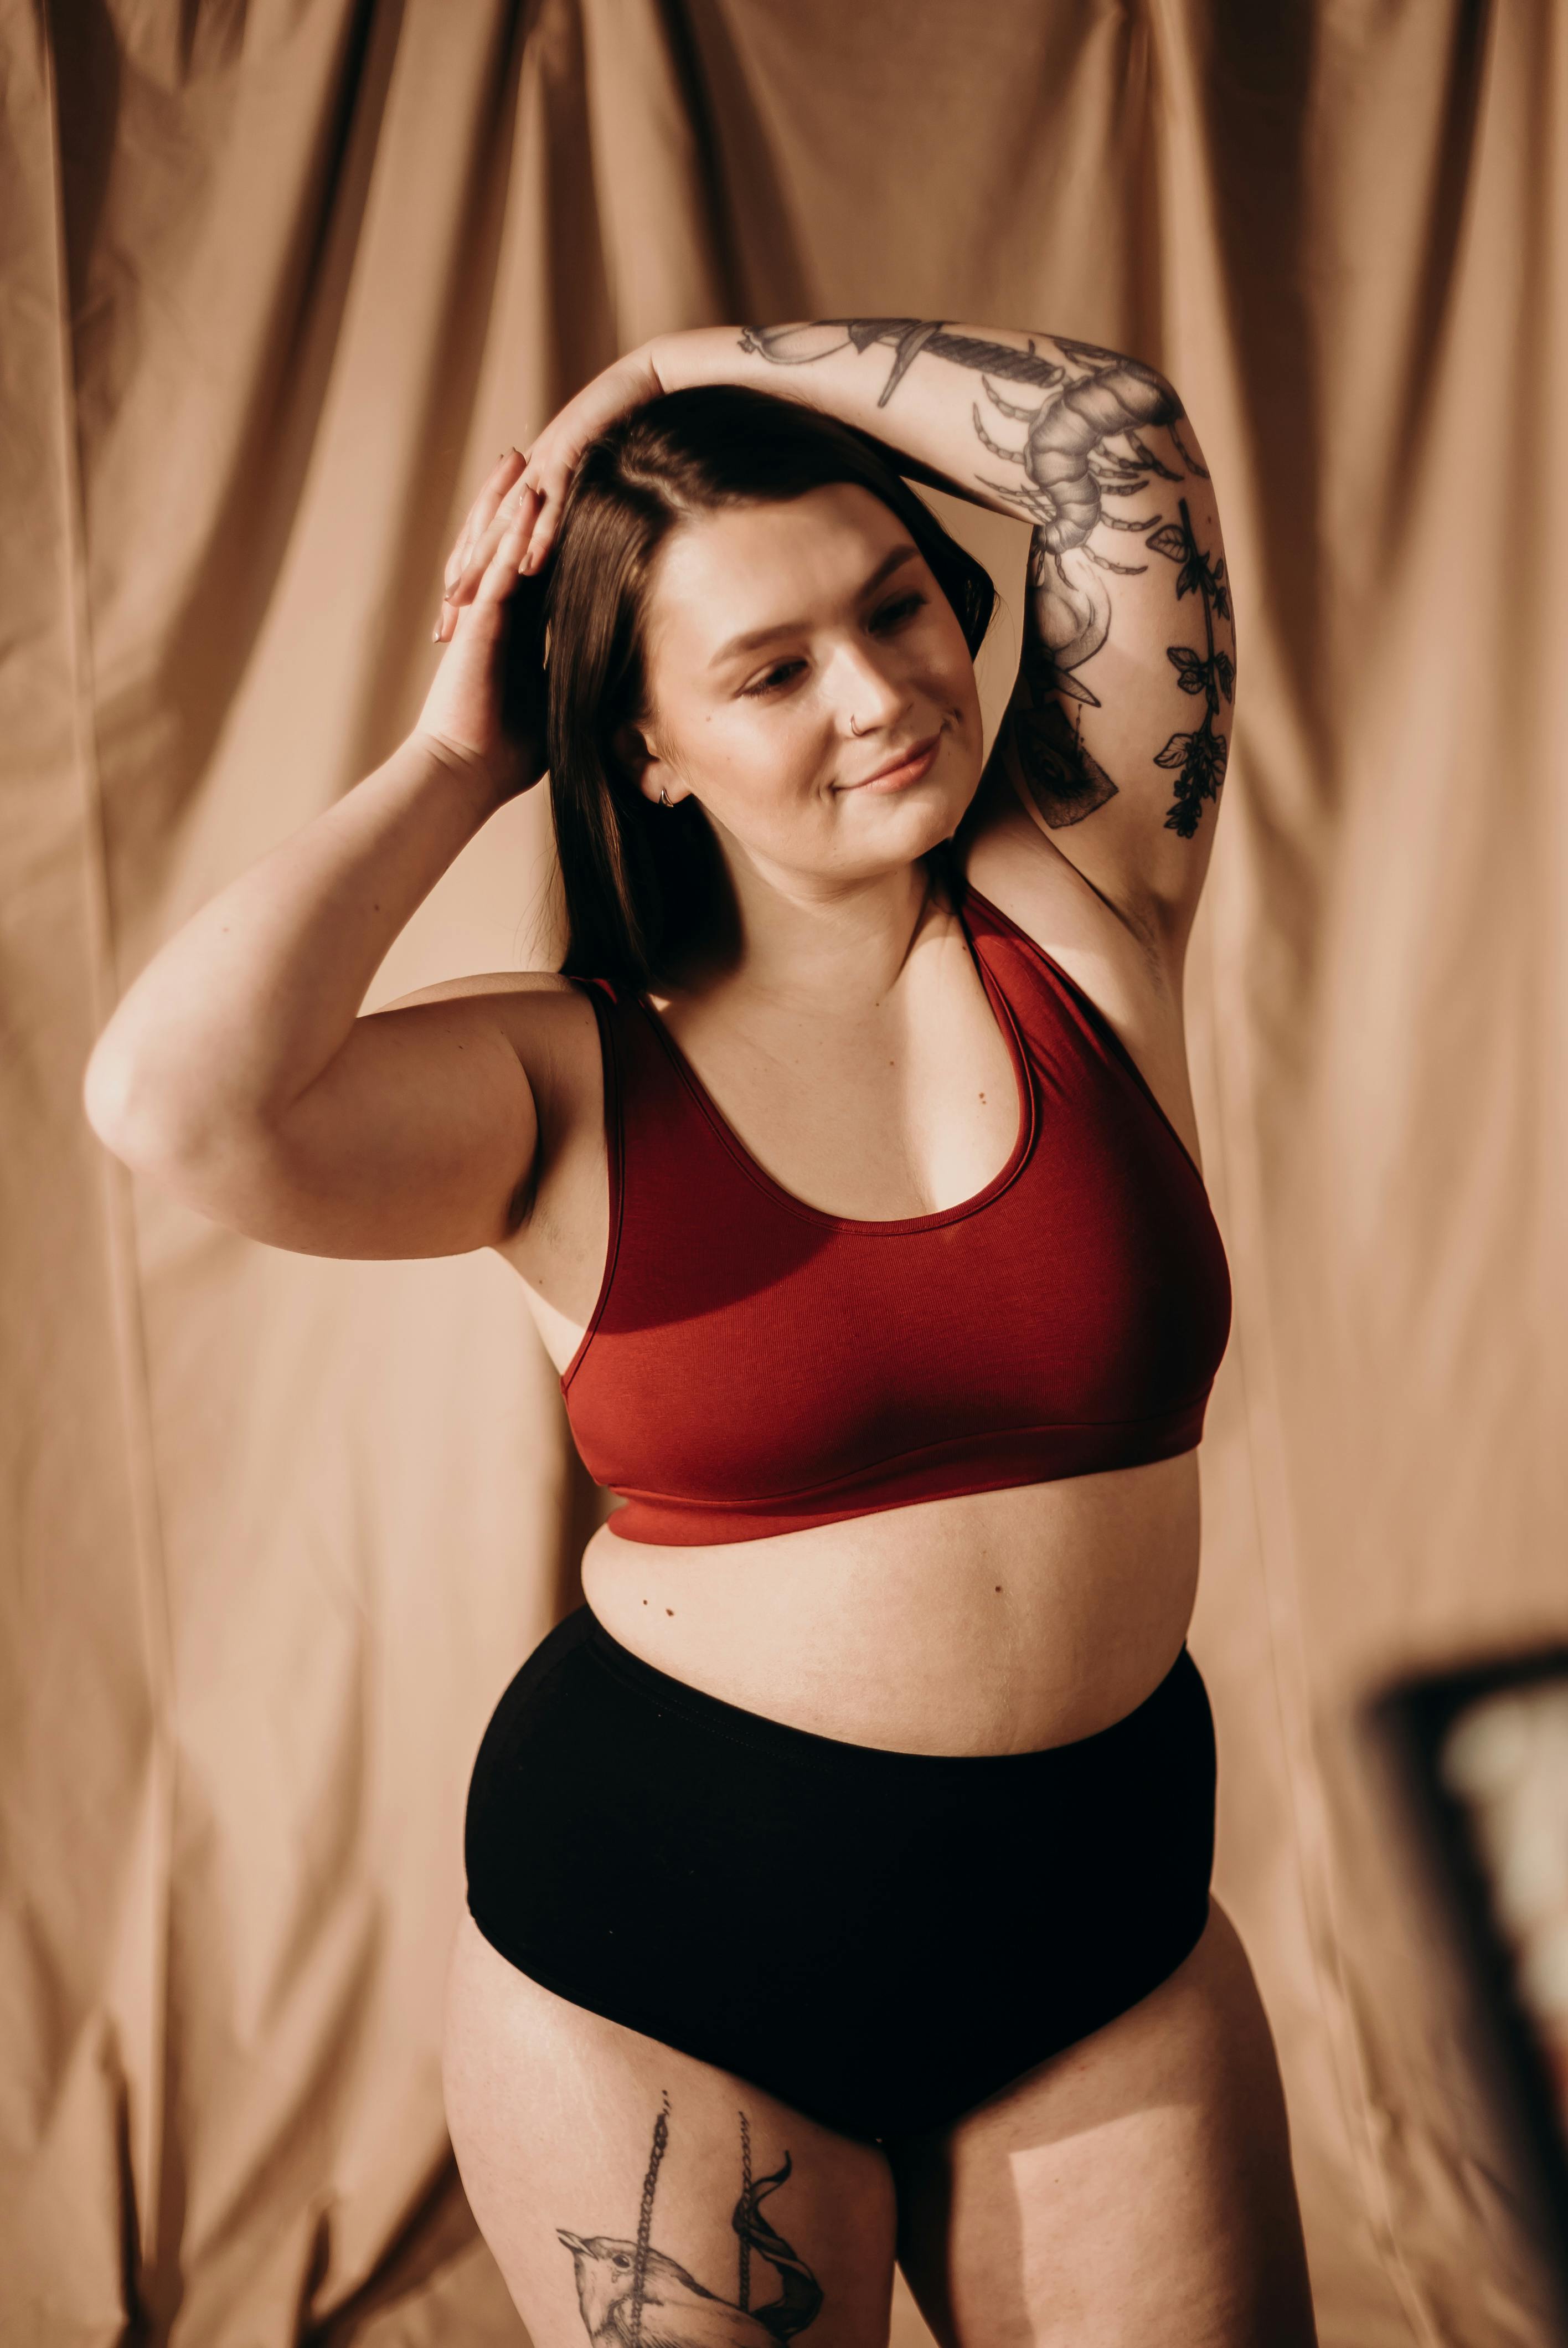 Woman in Red Sports Bra and Black Underwear · Free Stock Photo